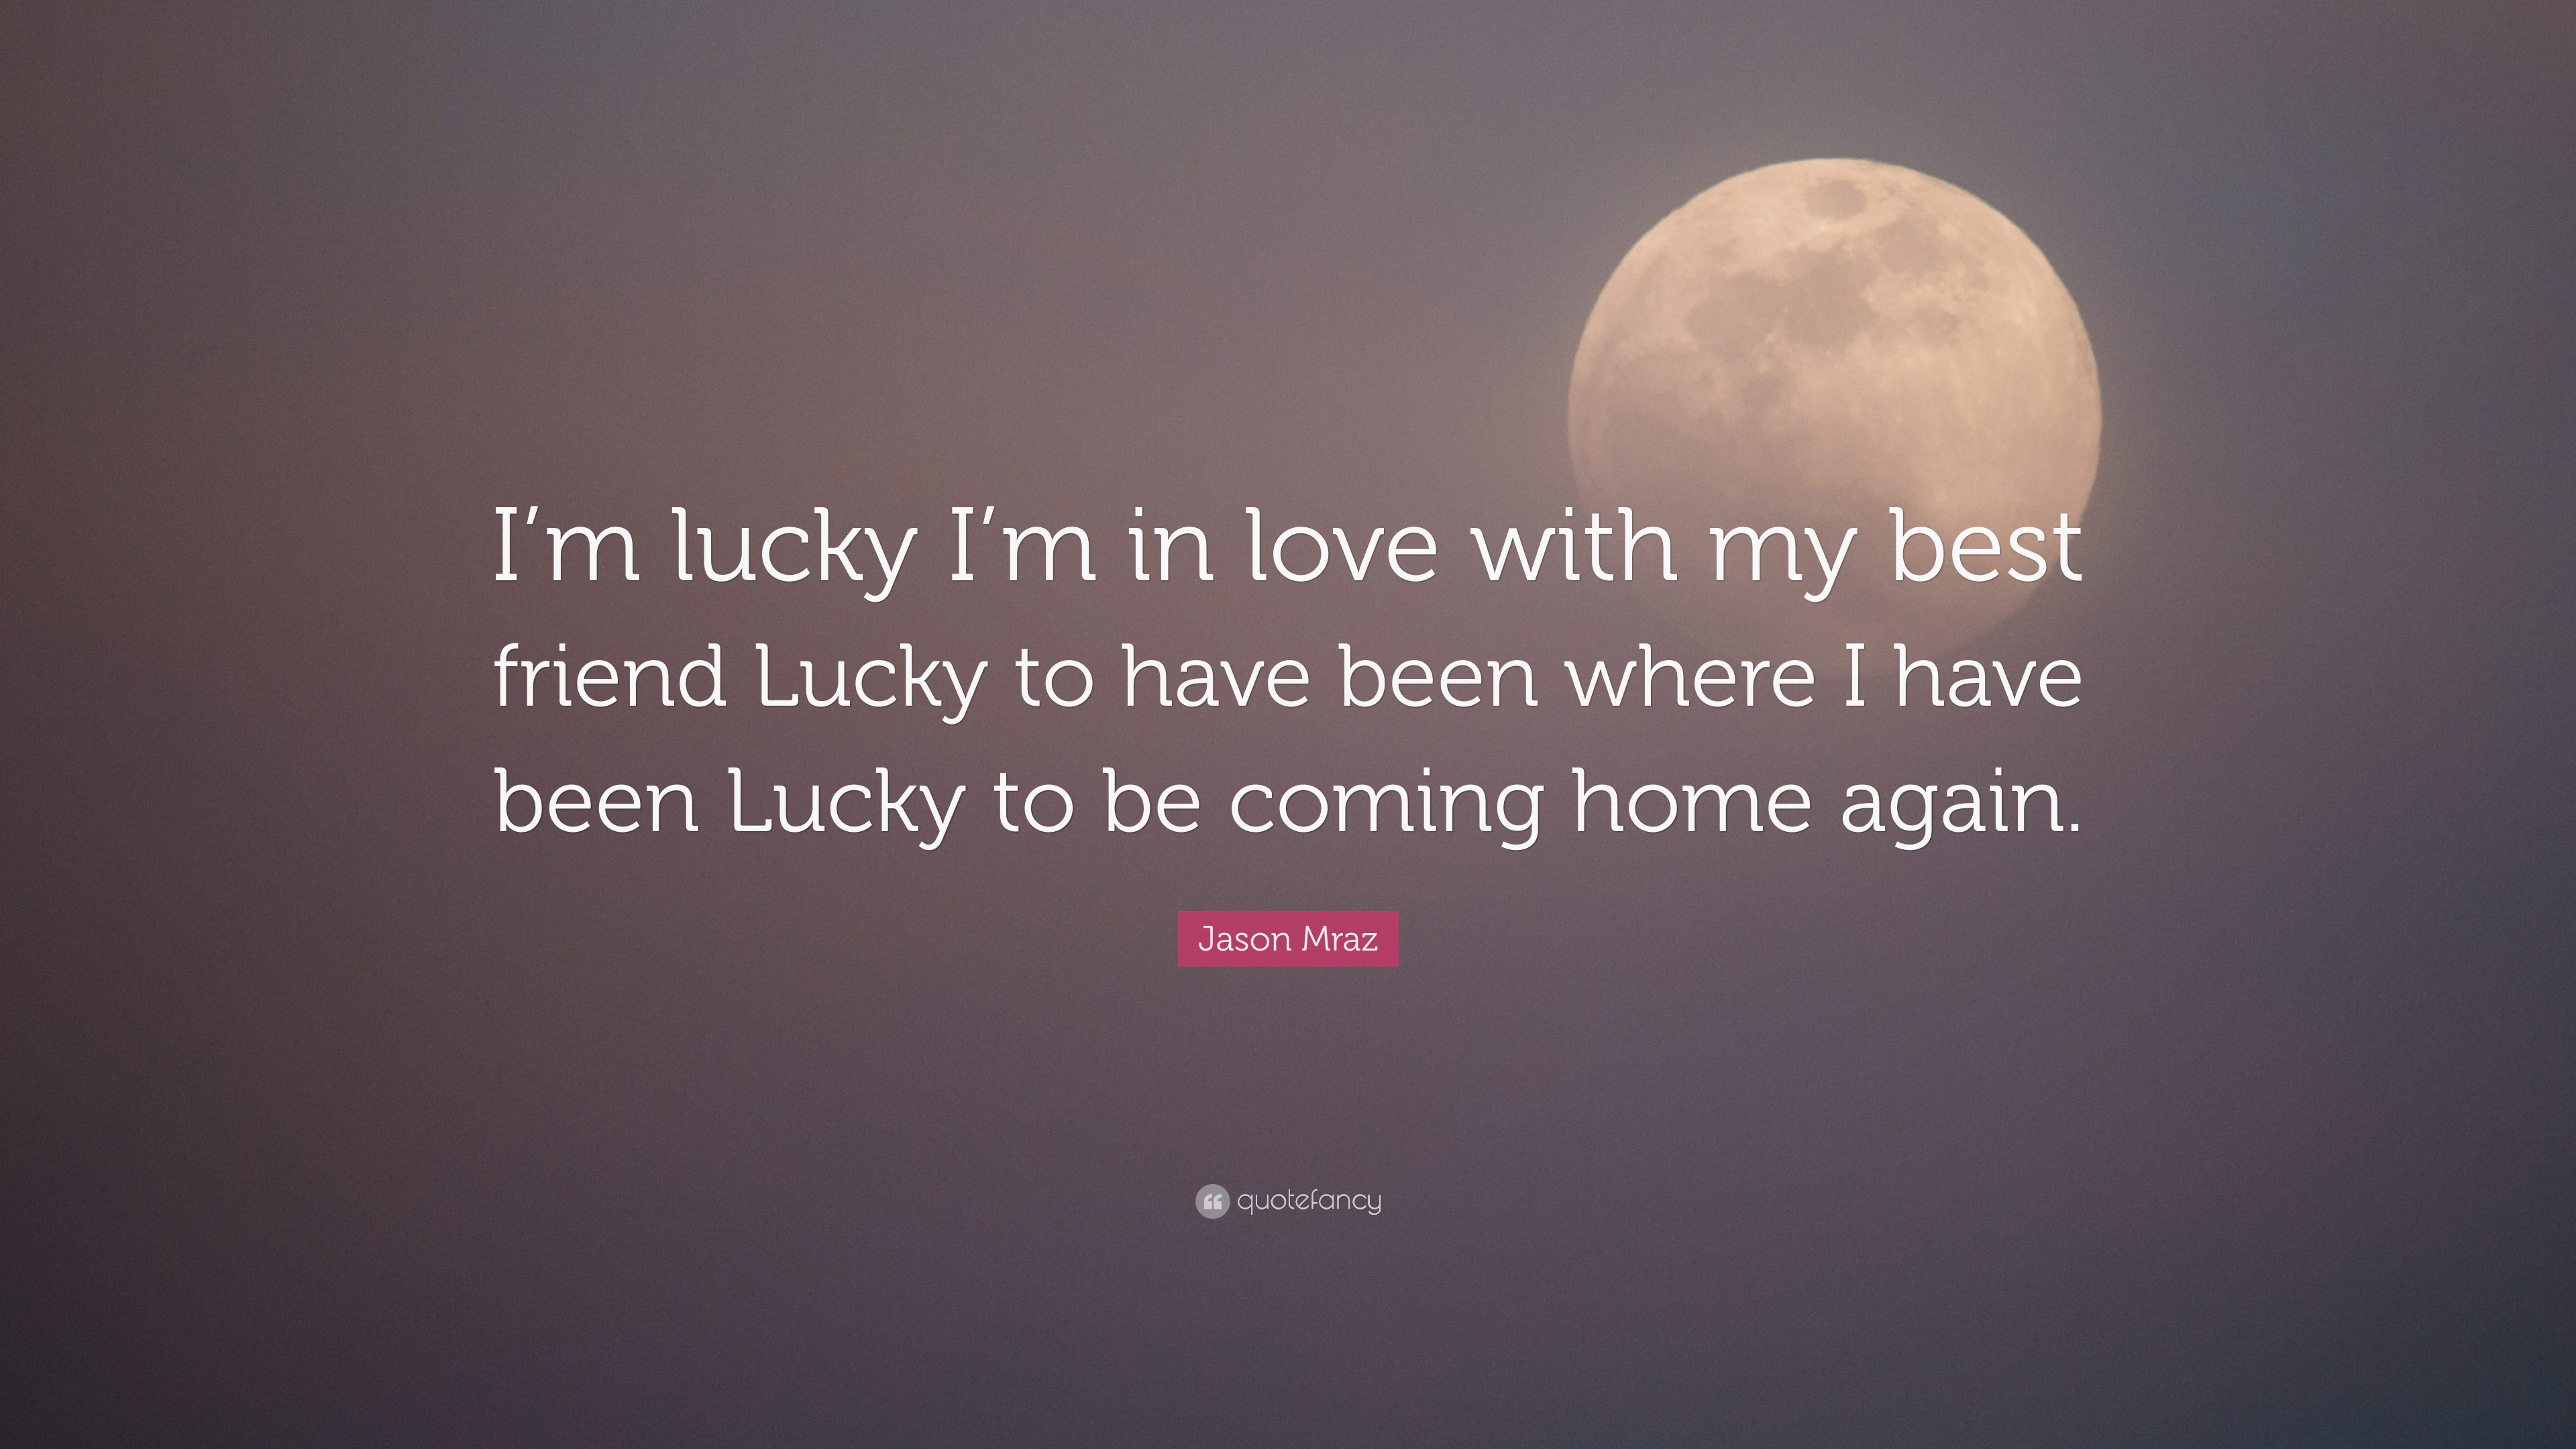 Jason Mraz Quote: “I'm lucky I'm in love with my best friend Lucky to